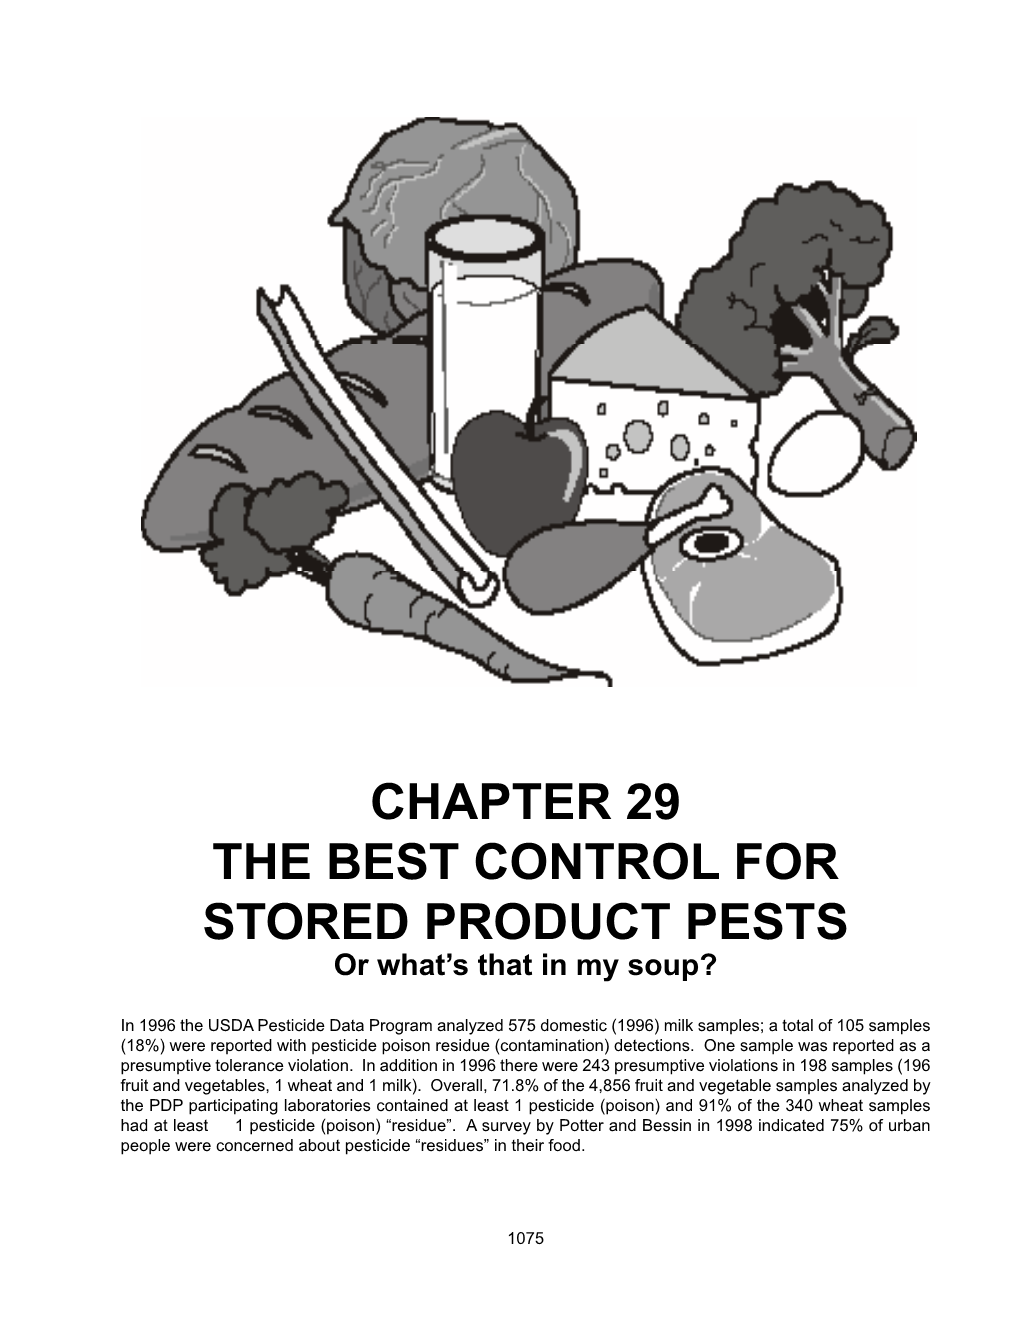 CHAPTER 29 the BEST CONTROL for STORED PRODUCT PESTS Or What’S That in My Soup?